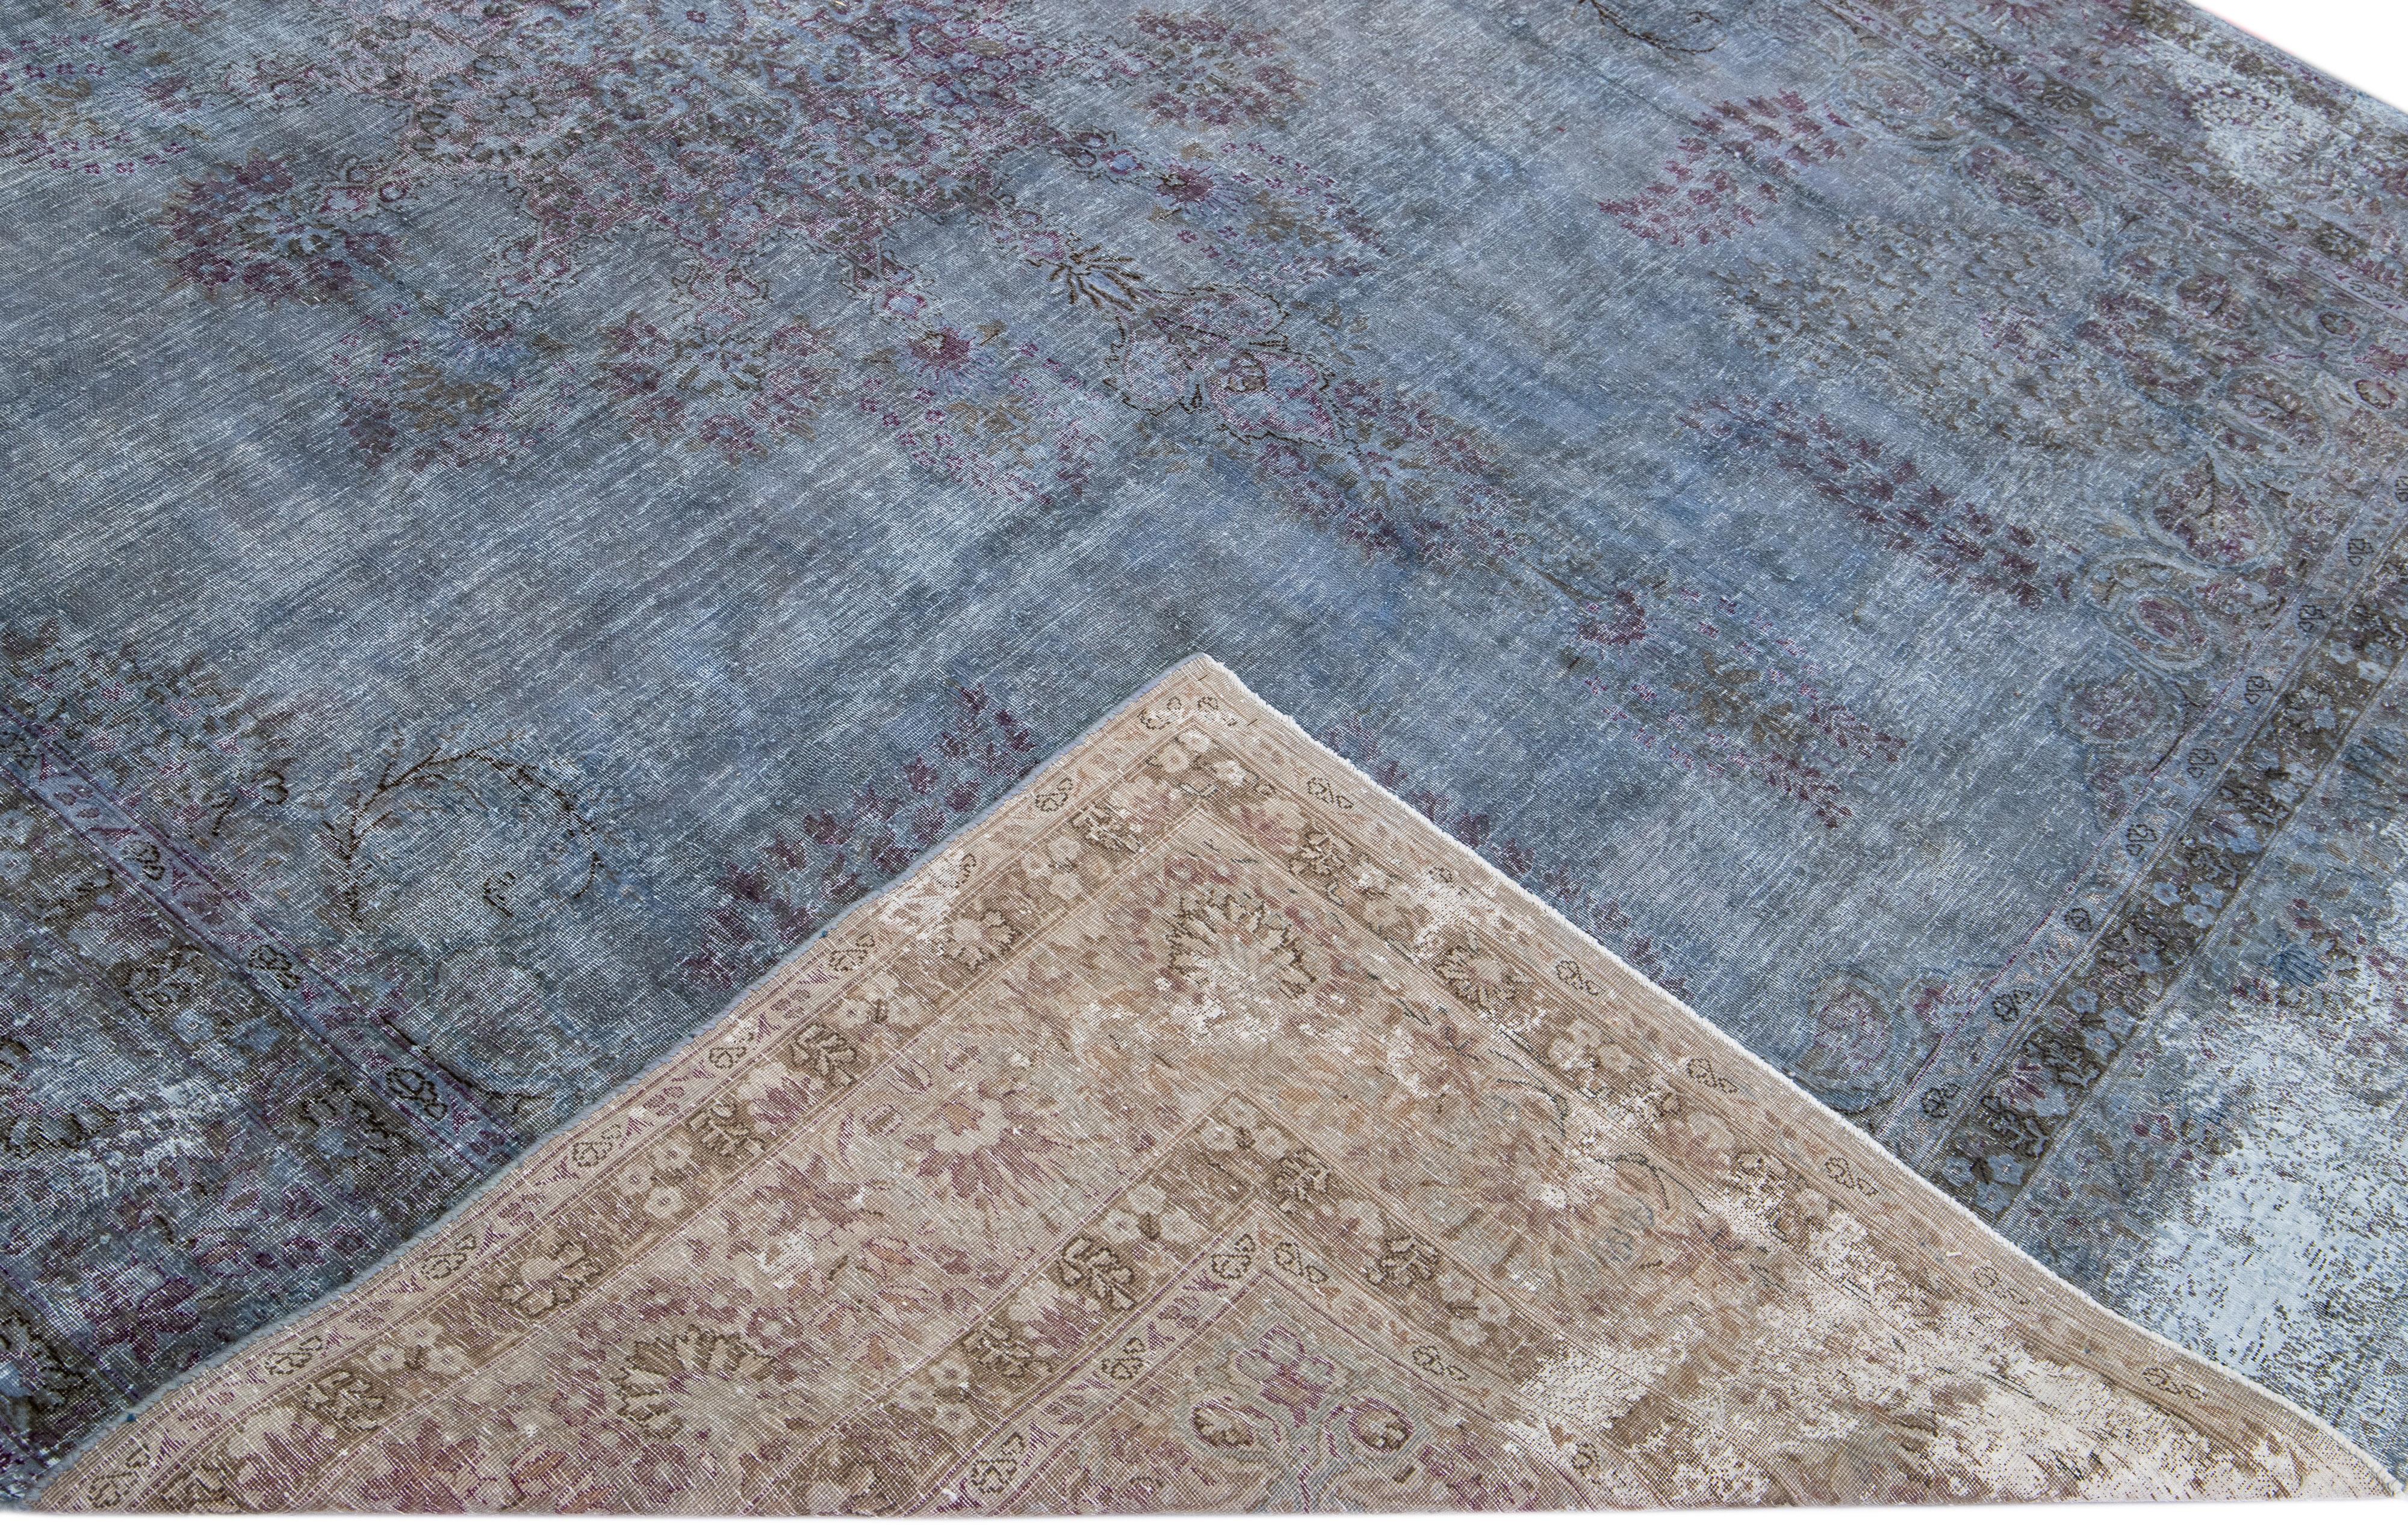 Beautiful Vintage Overdyed hand-knotted wool rug with a blue field. This Persian rug has purple and gray accents in an all-over medallion design.

This rug measures: 8'3